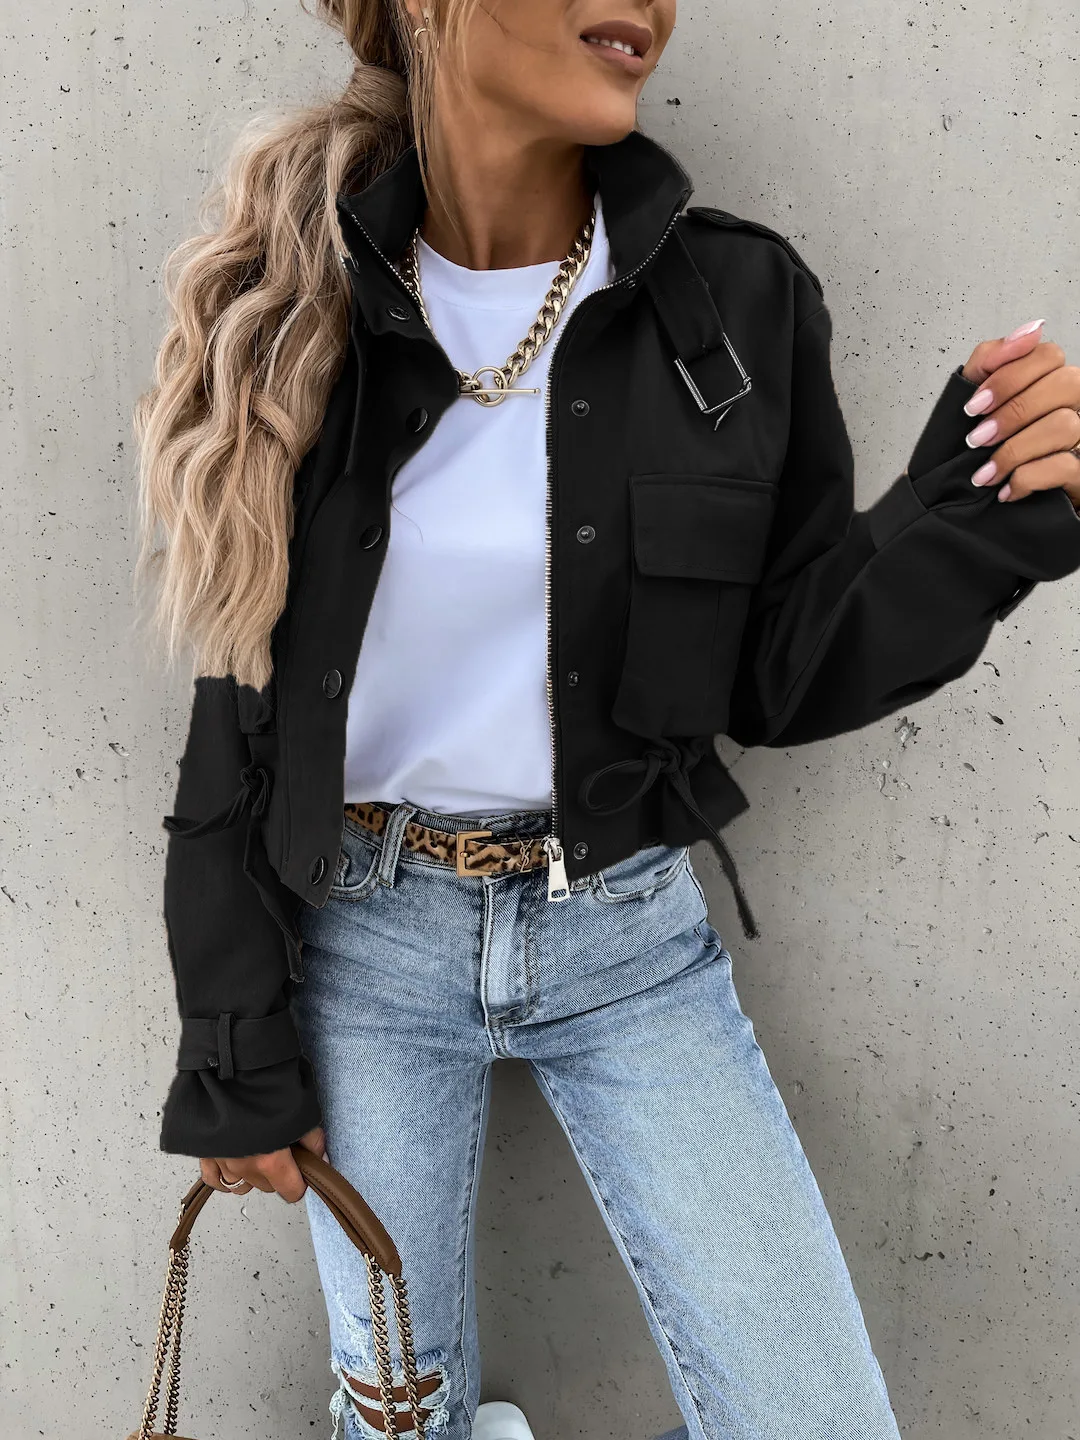 

Winter Jacket Women 2022 Streetwear Long Sleeve Top Bomber Trending Products Clothes Coats Short Tooling Style Locomotive